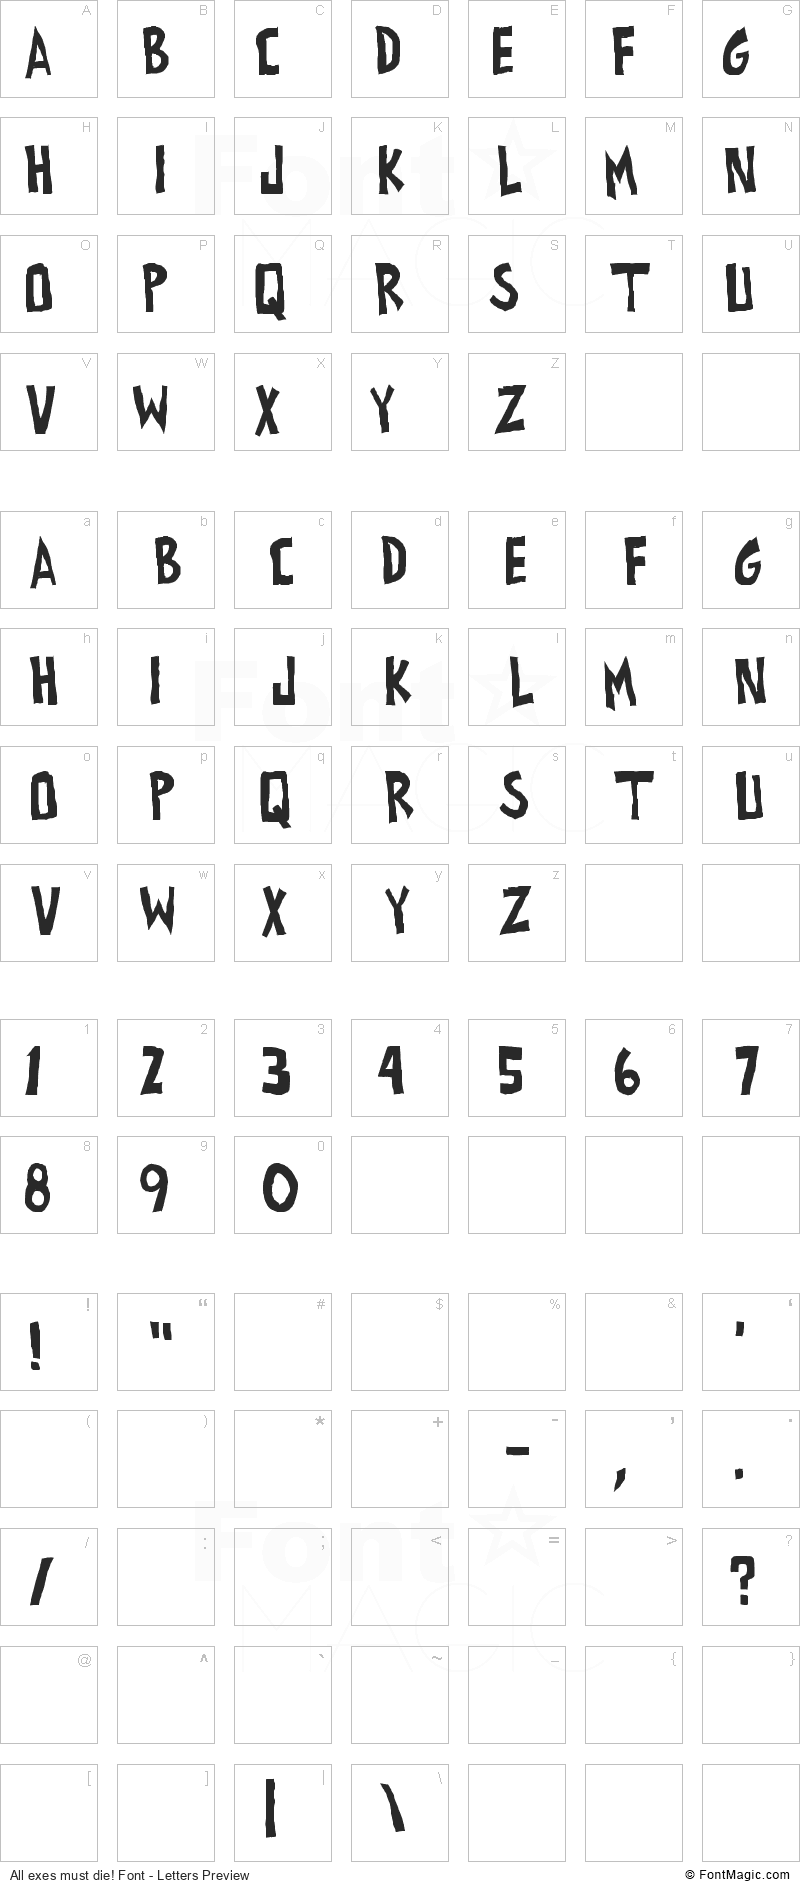 All exes must die! Font - All Latters Preview Chart